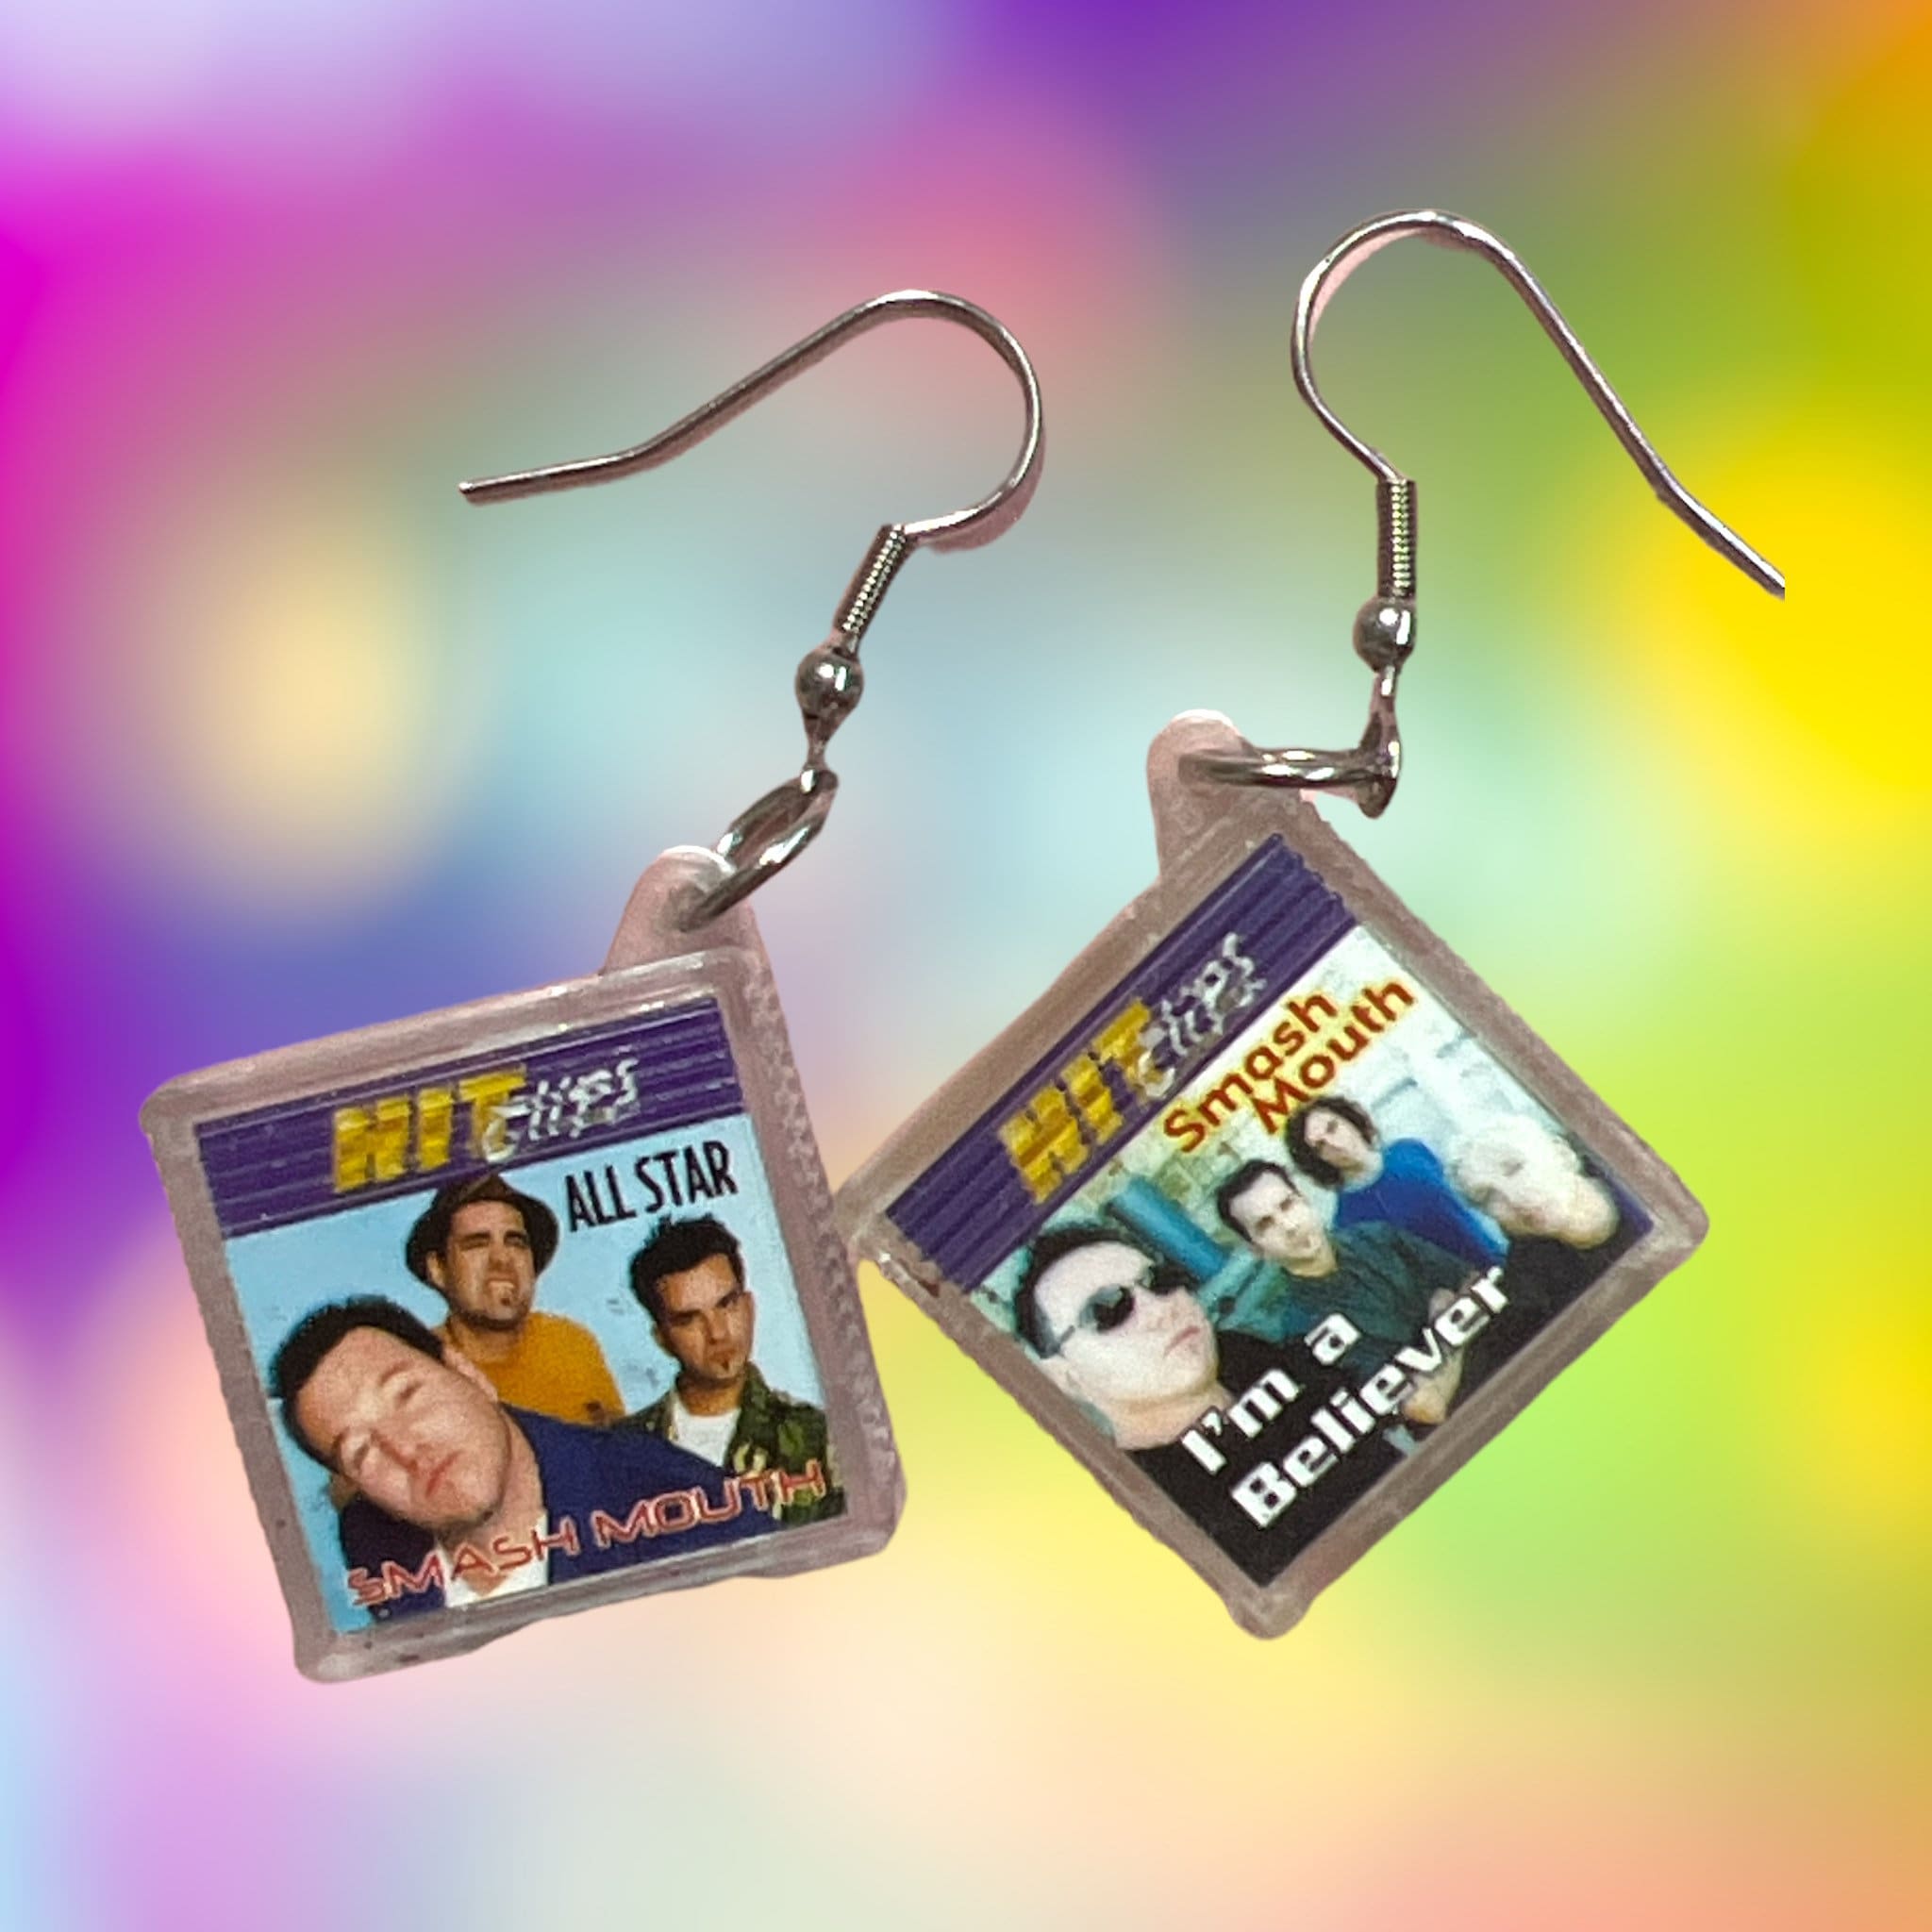 YAHOO HIT CLIPS - GTIN/EAN/UPC 76930020159 - Product Details - Cosmos